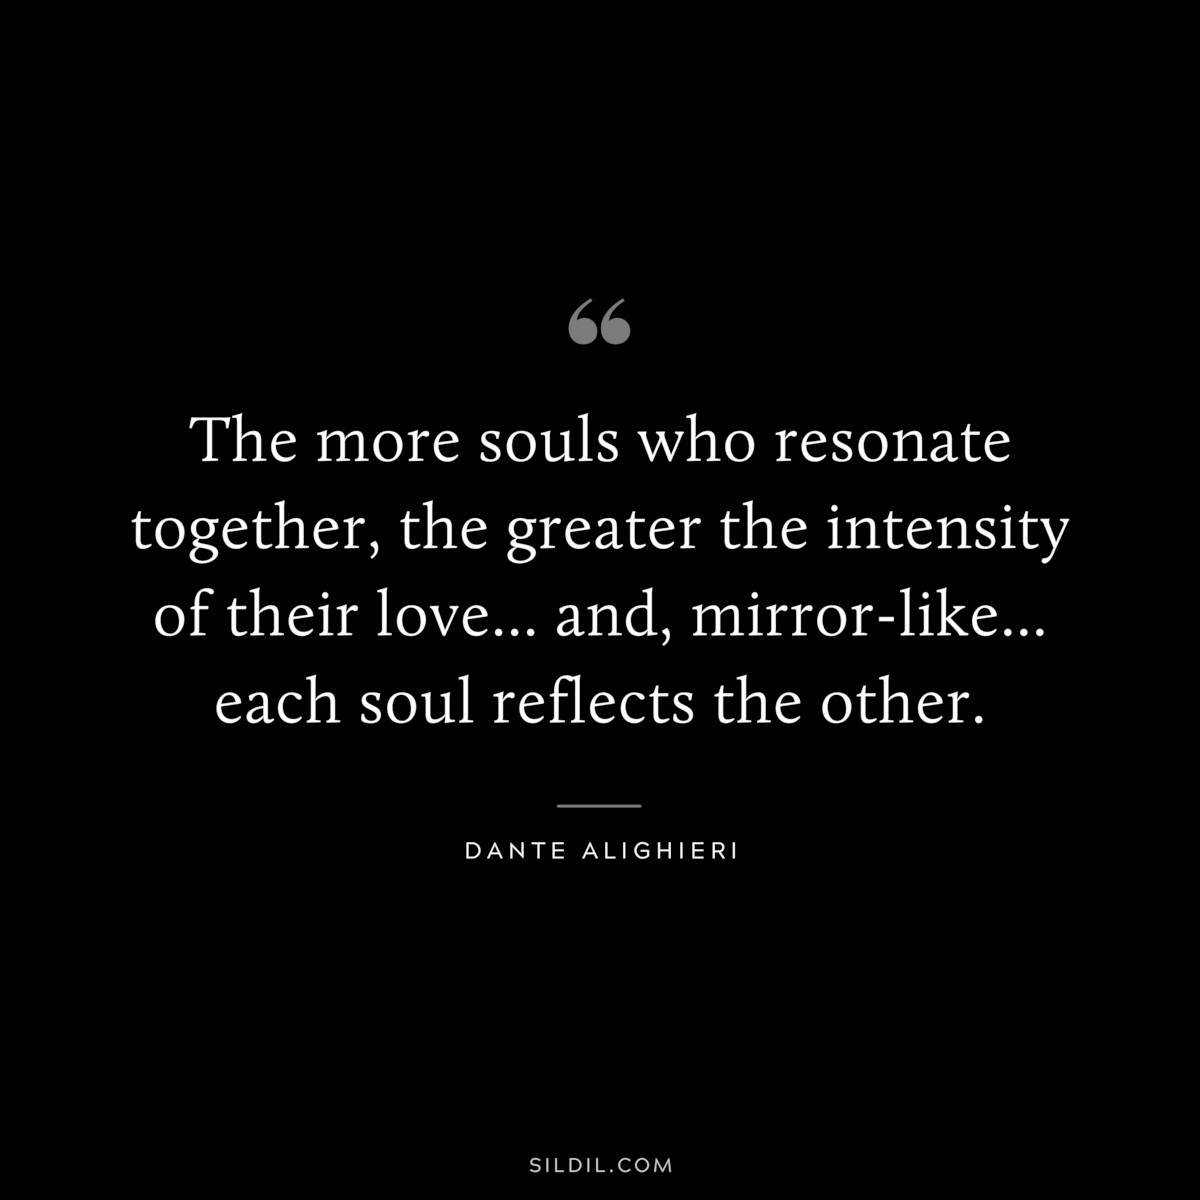 The more souls who resonate together, the greater the intensity of their love... and, mirror-like... each soul reflects the other. ― Dante Alighieri